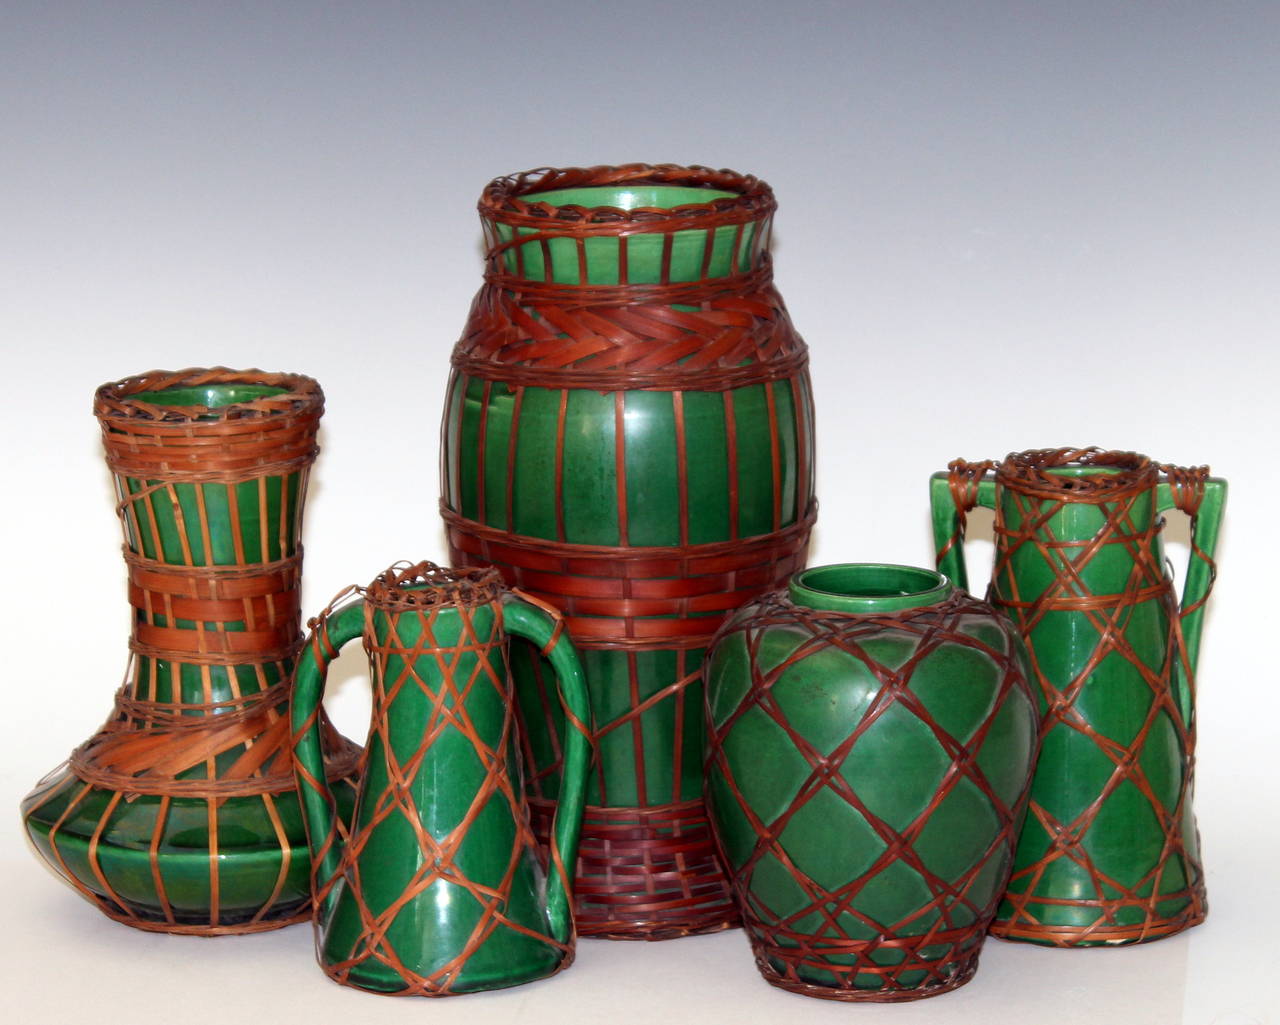 20th Century Green Arts & Crafts Awaji Pottery Vases with Bamboo Weaving